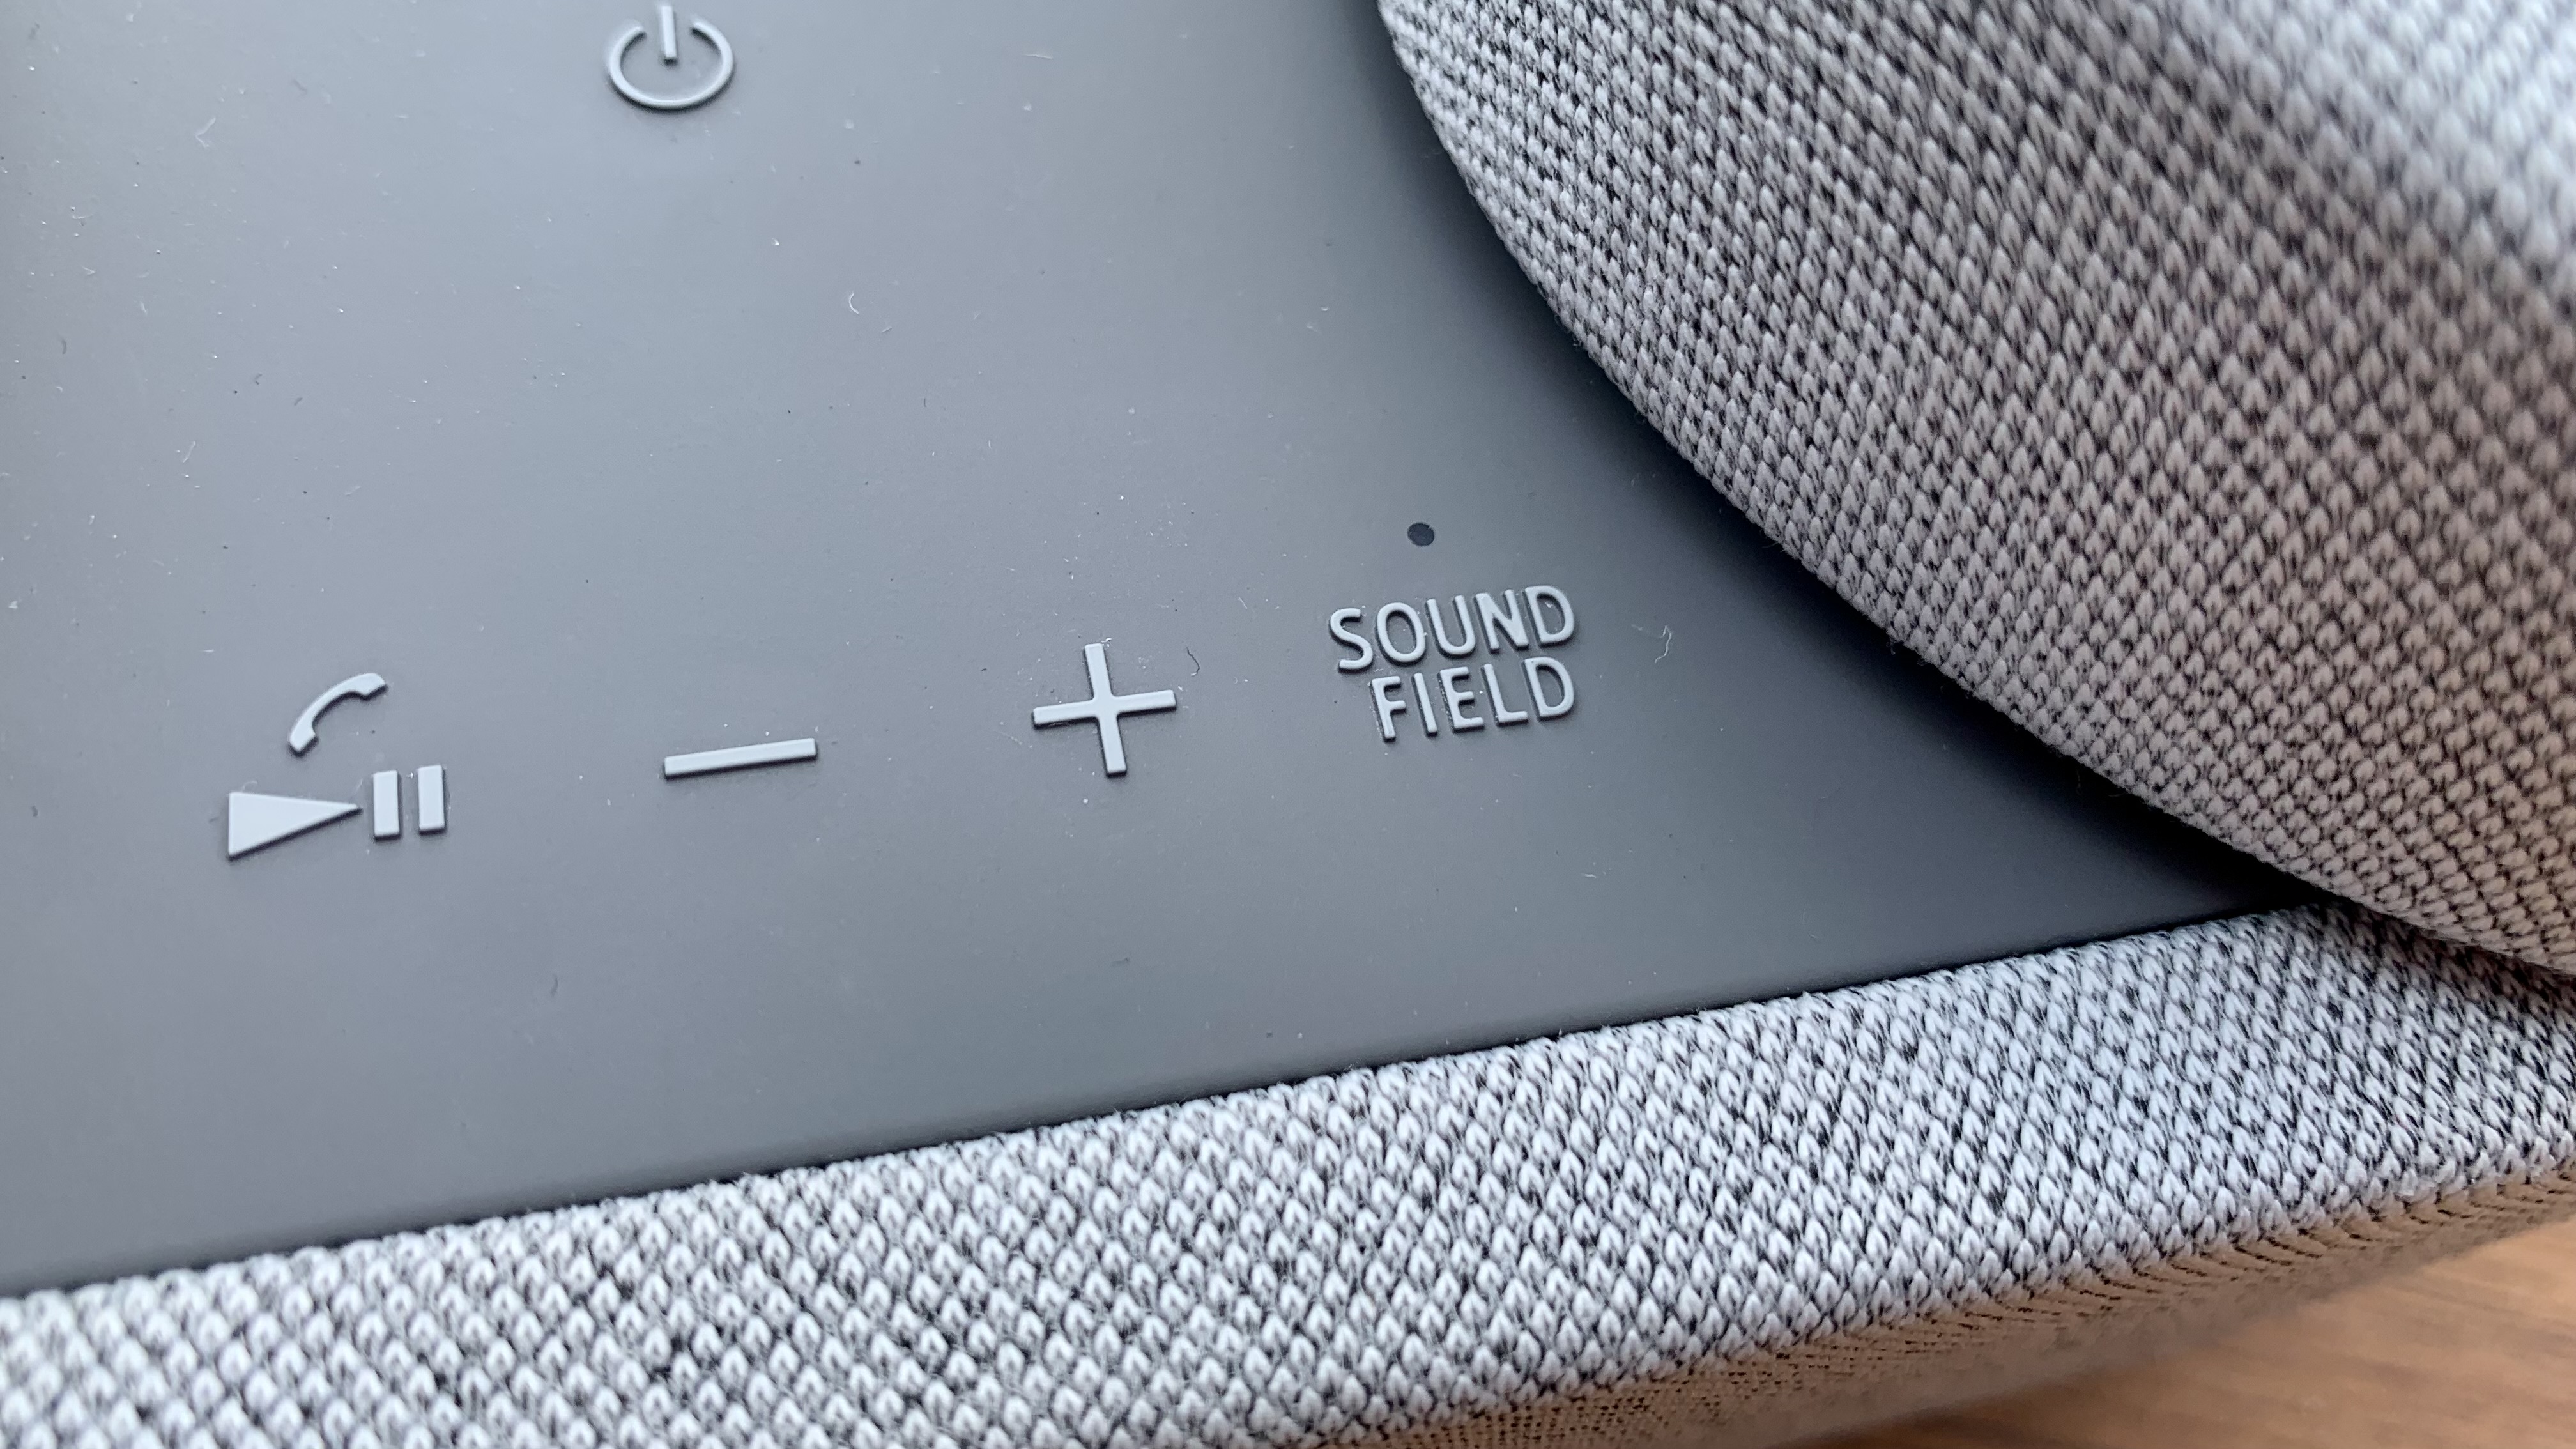 Sony HT-AX7 close up of the Sound Field button